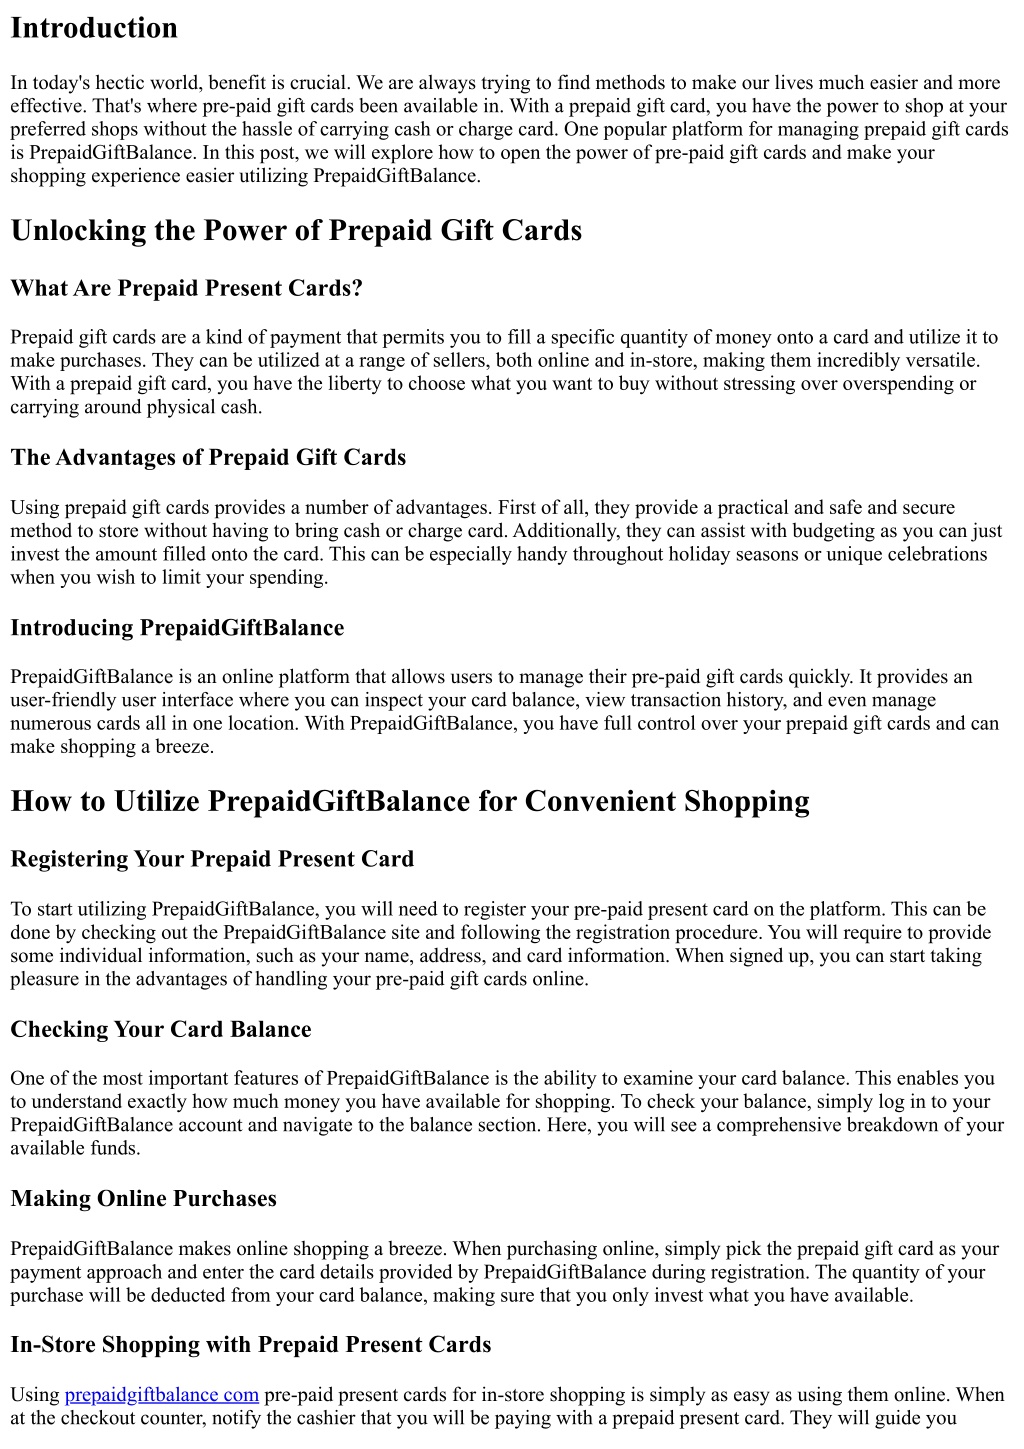 How to Use the Remaining Balance on a Prepaid Gift Card